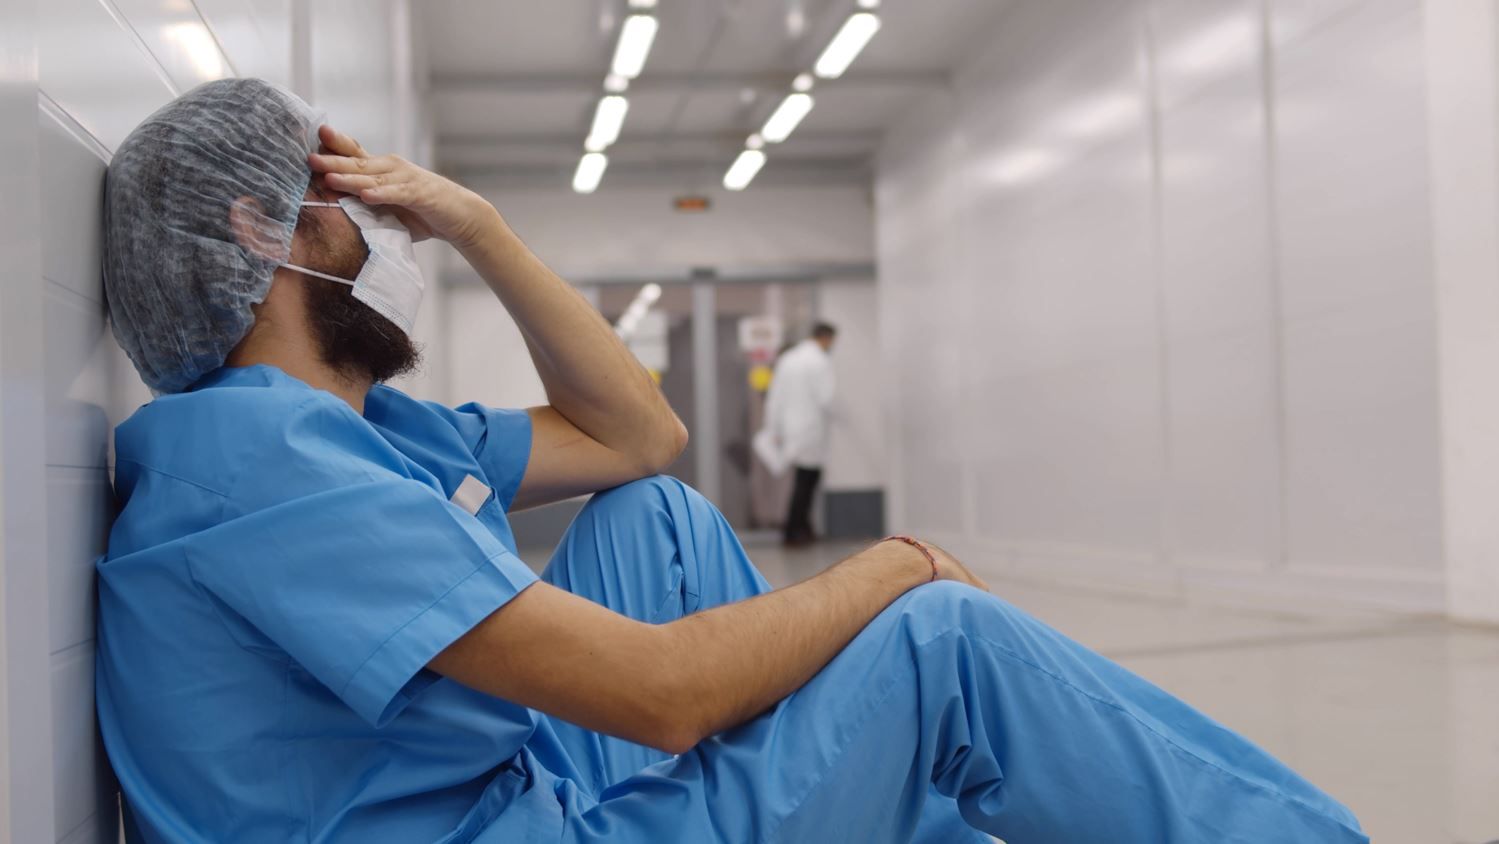 HHS Will Award $103 Million to Reduce Burnout in Health Care Workforce